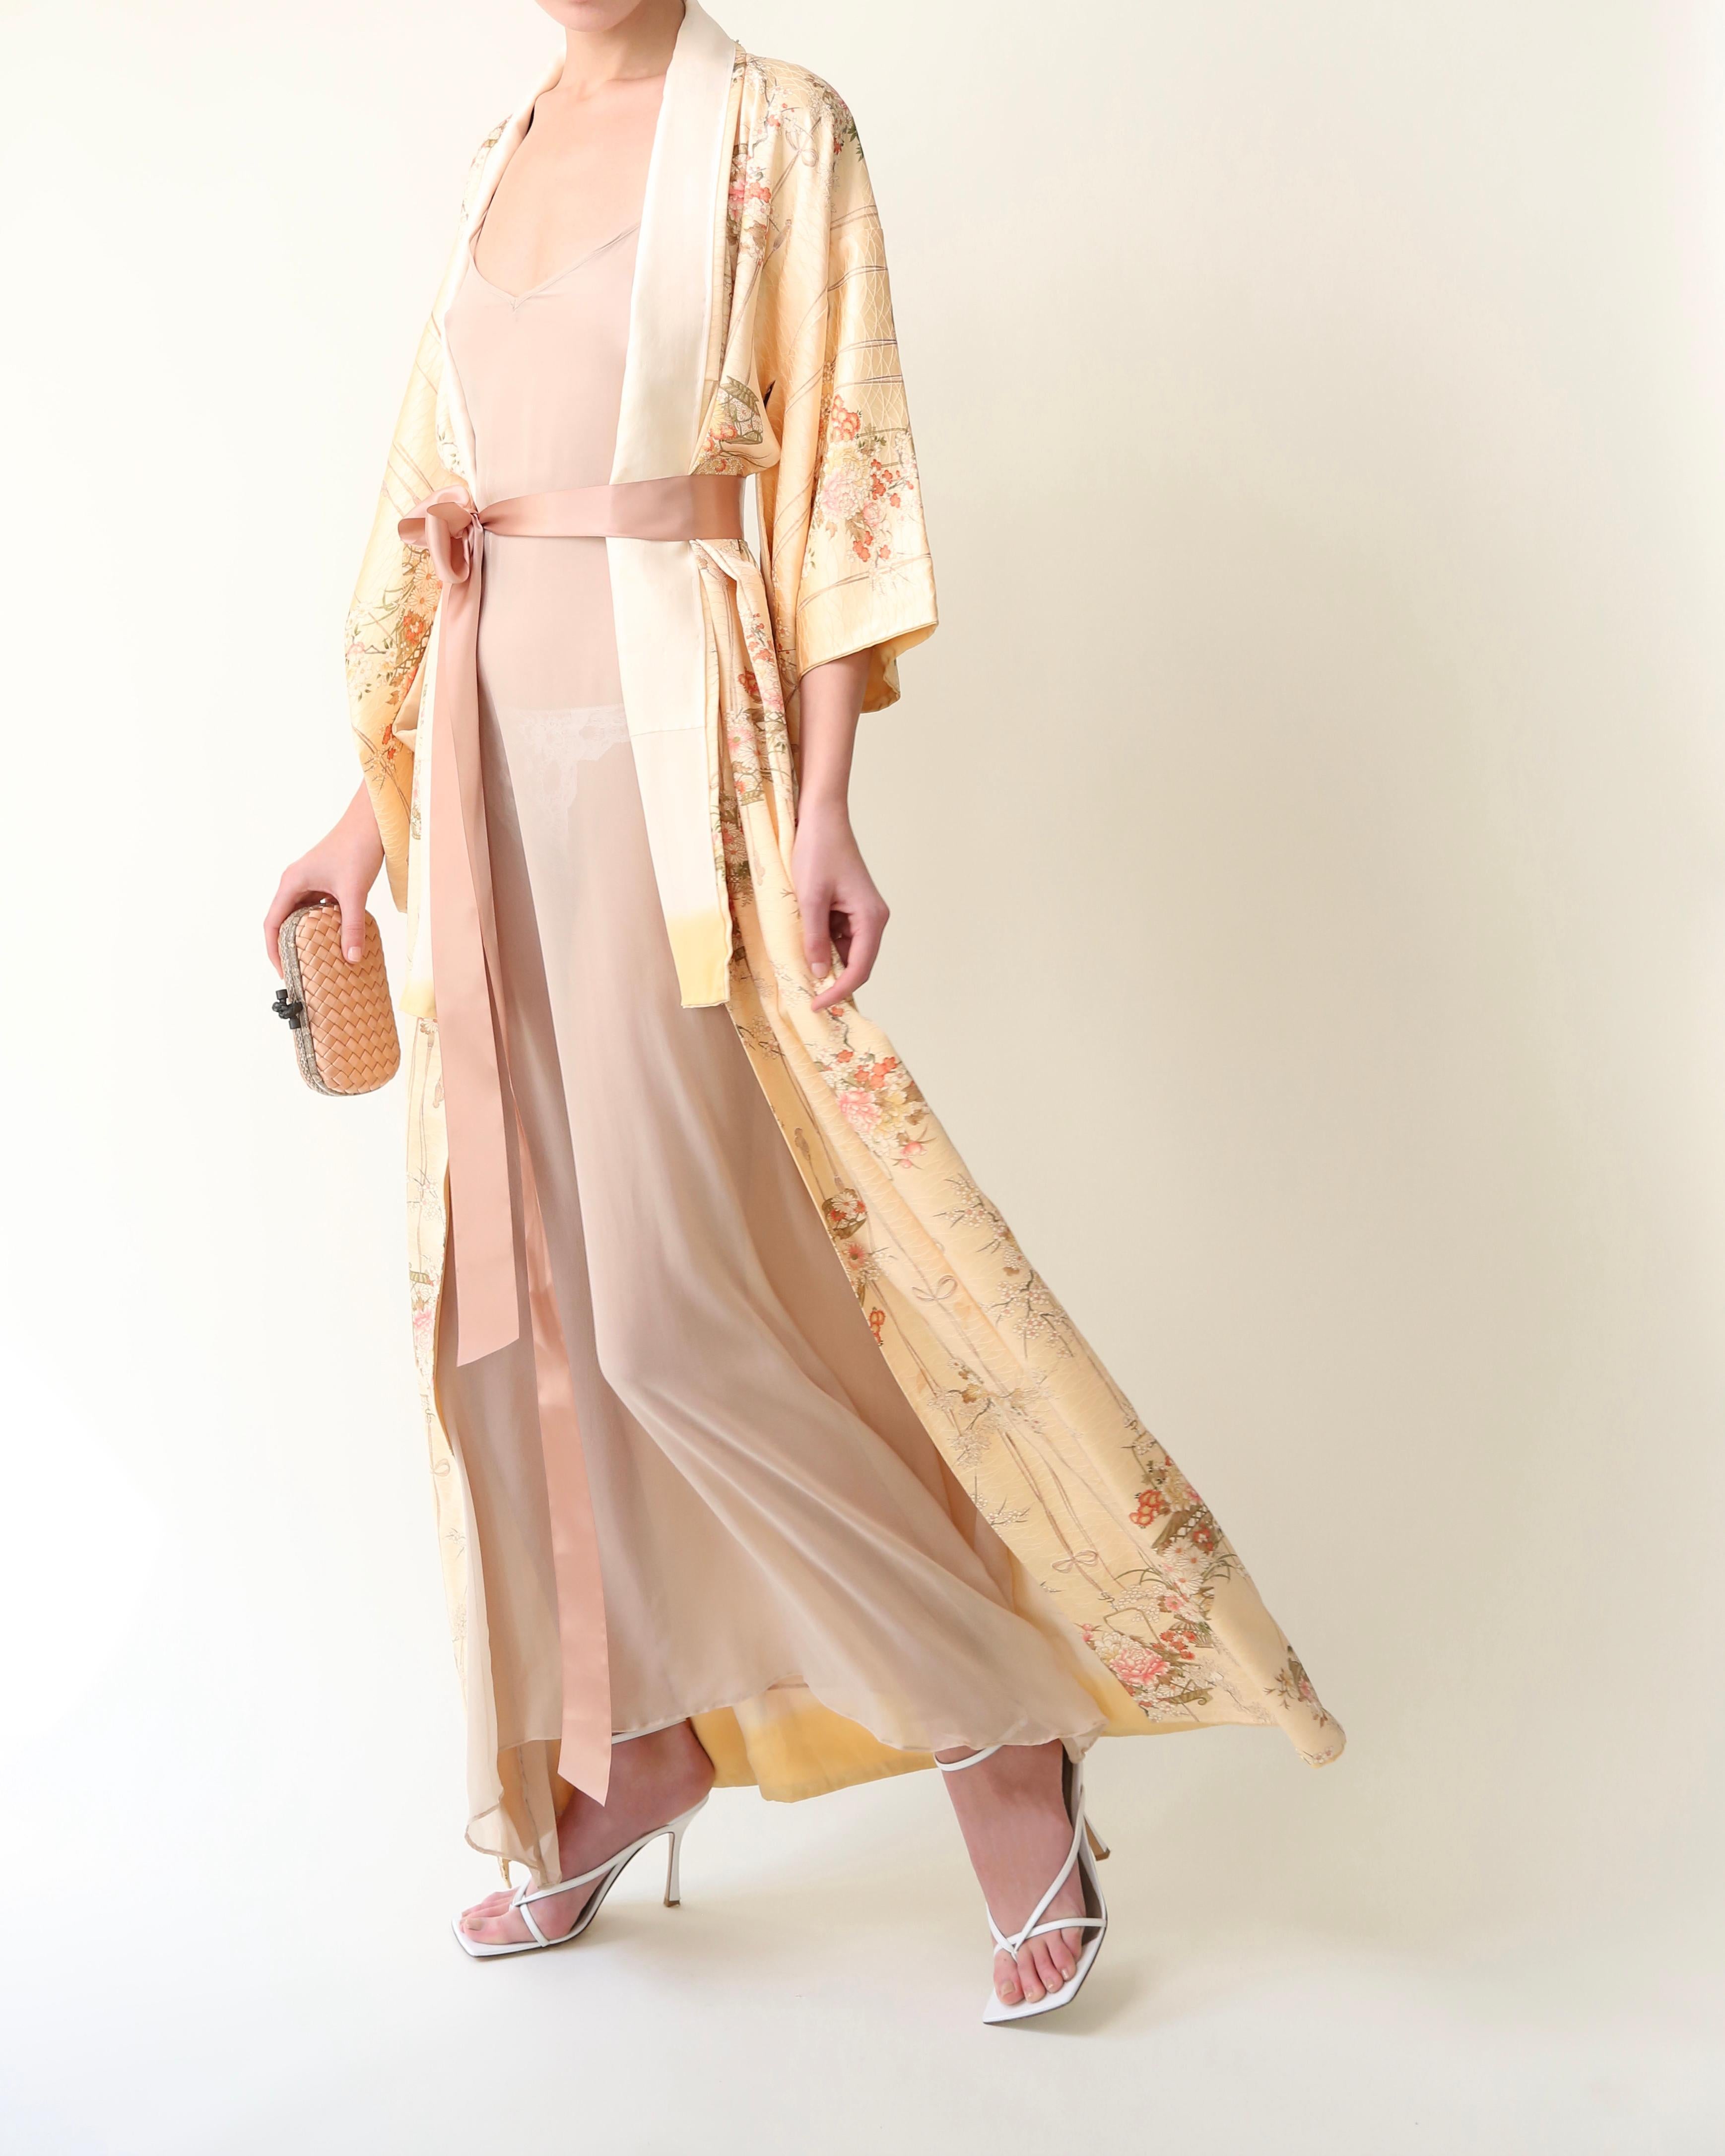 Vintage Japanese kimono in 100% silk 
Handmade in Japan 
Floor length
Pale peach with coloured print
Comes with a blush pink silk ribbon that gives you the option to wear this open or closed 

FREE SHIPPING WORLDWIDE!!!

Composition:
100% Silk